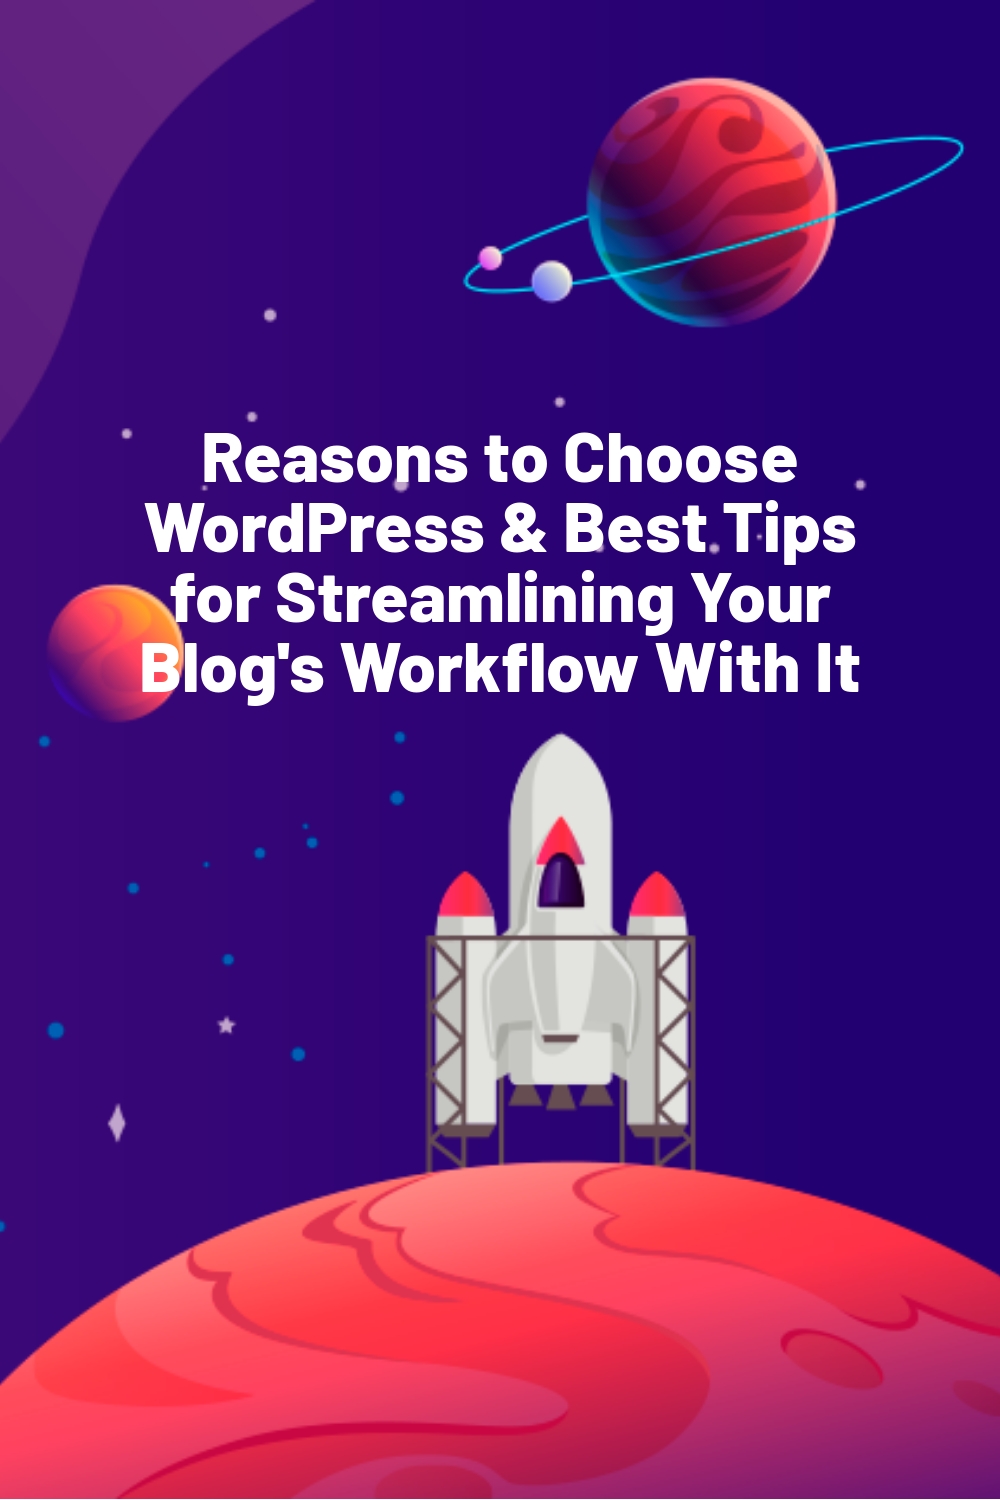 Reasons to Choose WordPress & Best Tips for Streamlining Your Blog’s Workflow With It